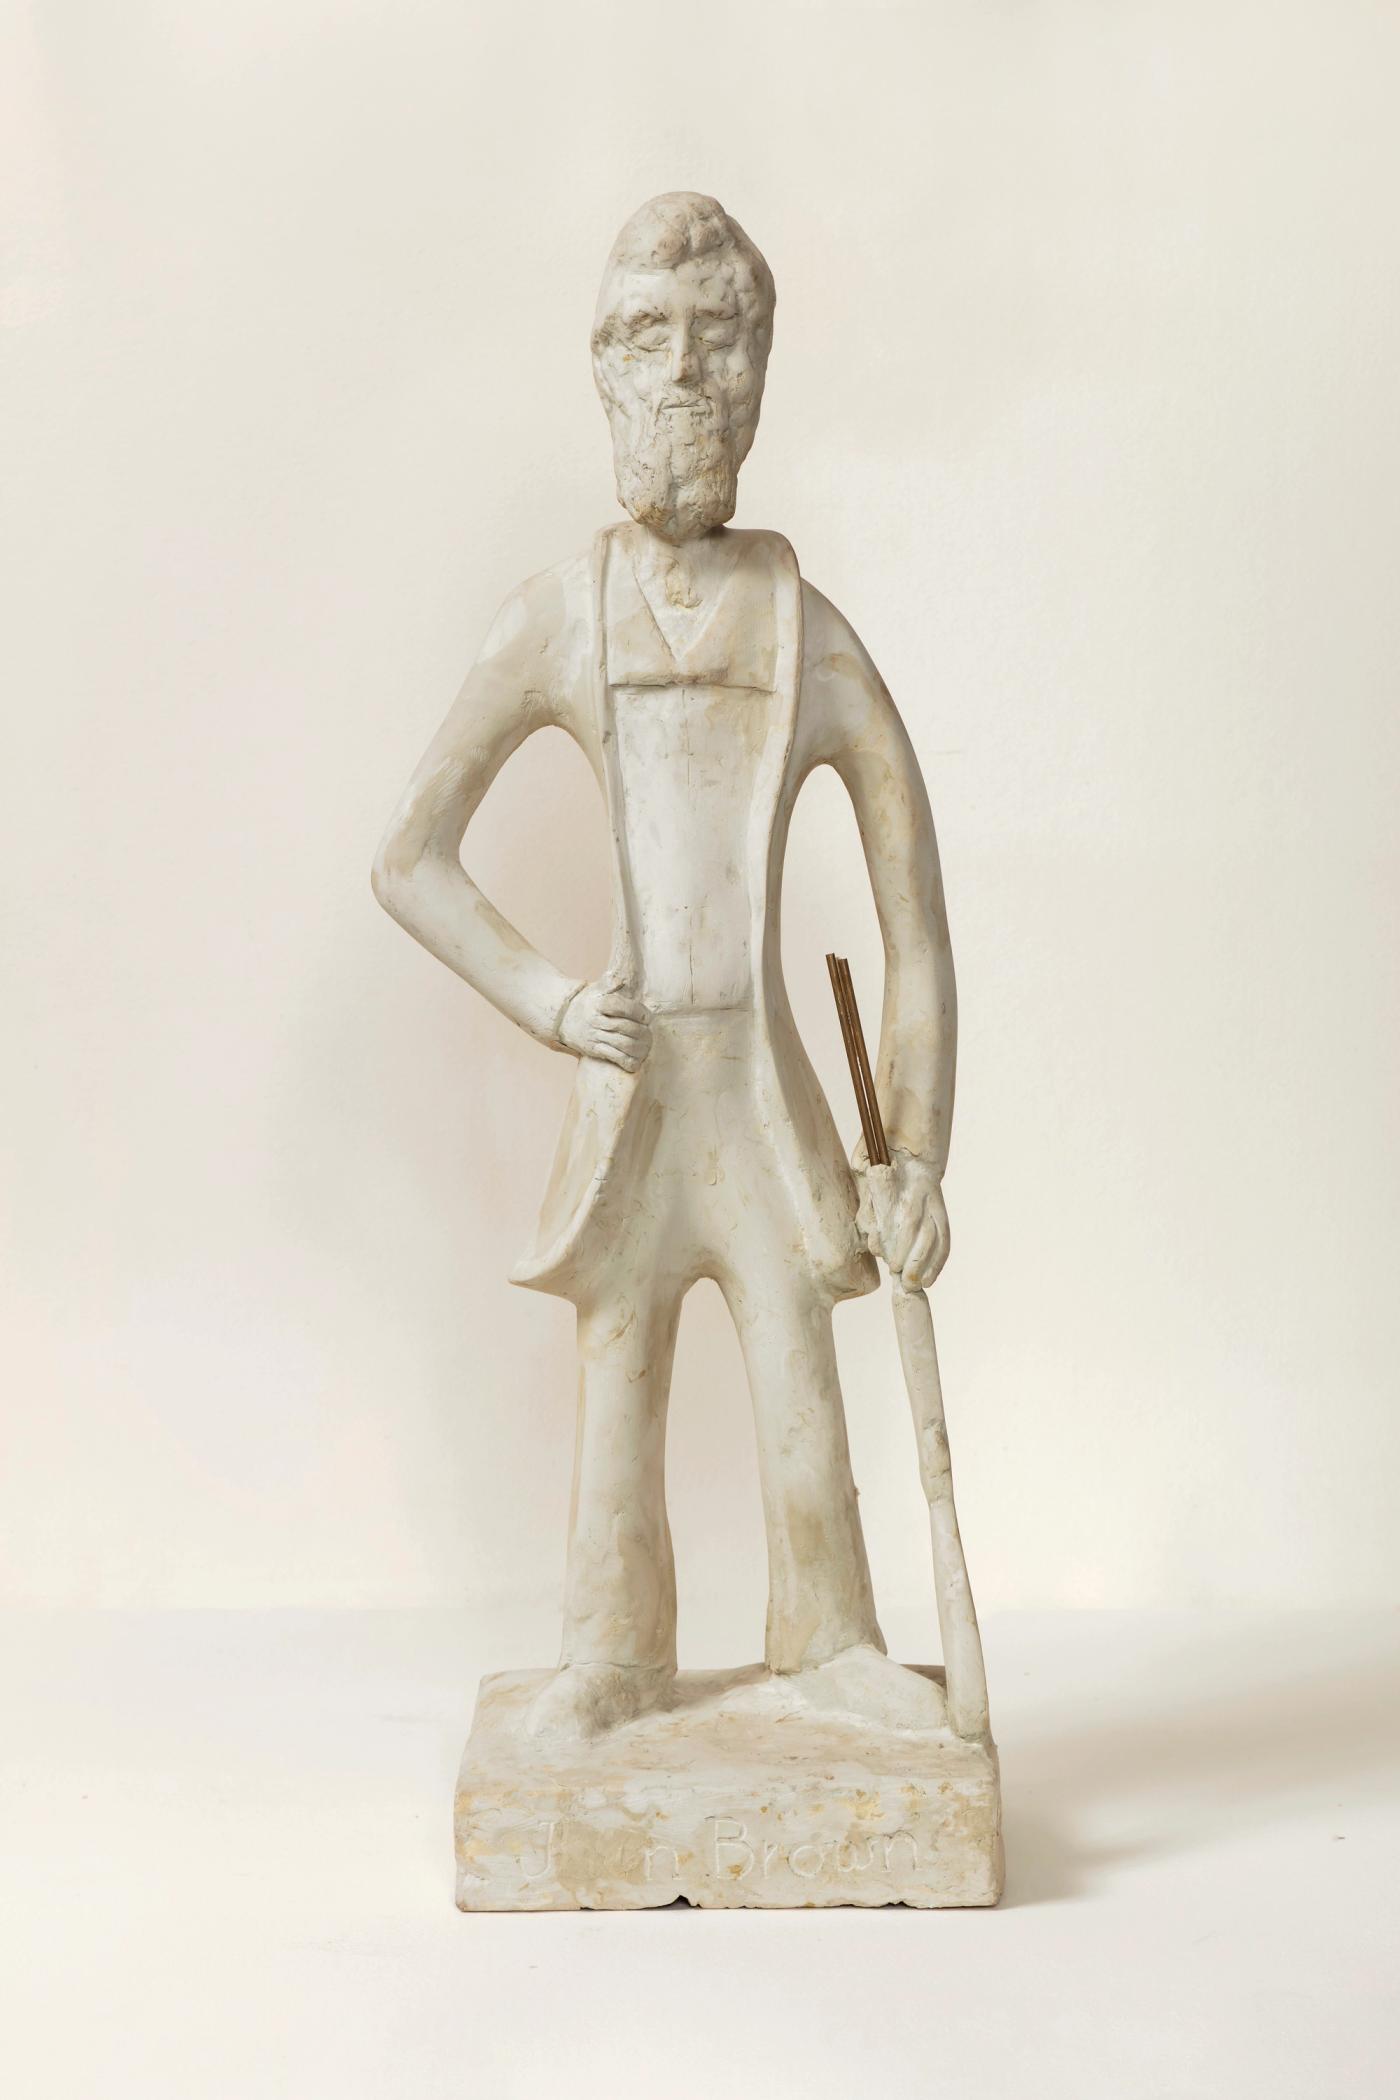 Image of John Brown White, 2021: Epoxy clay and brass